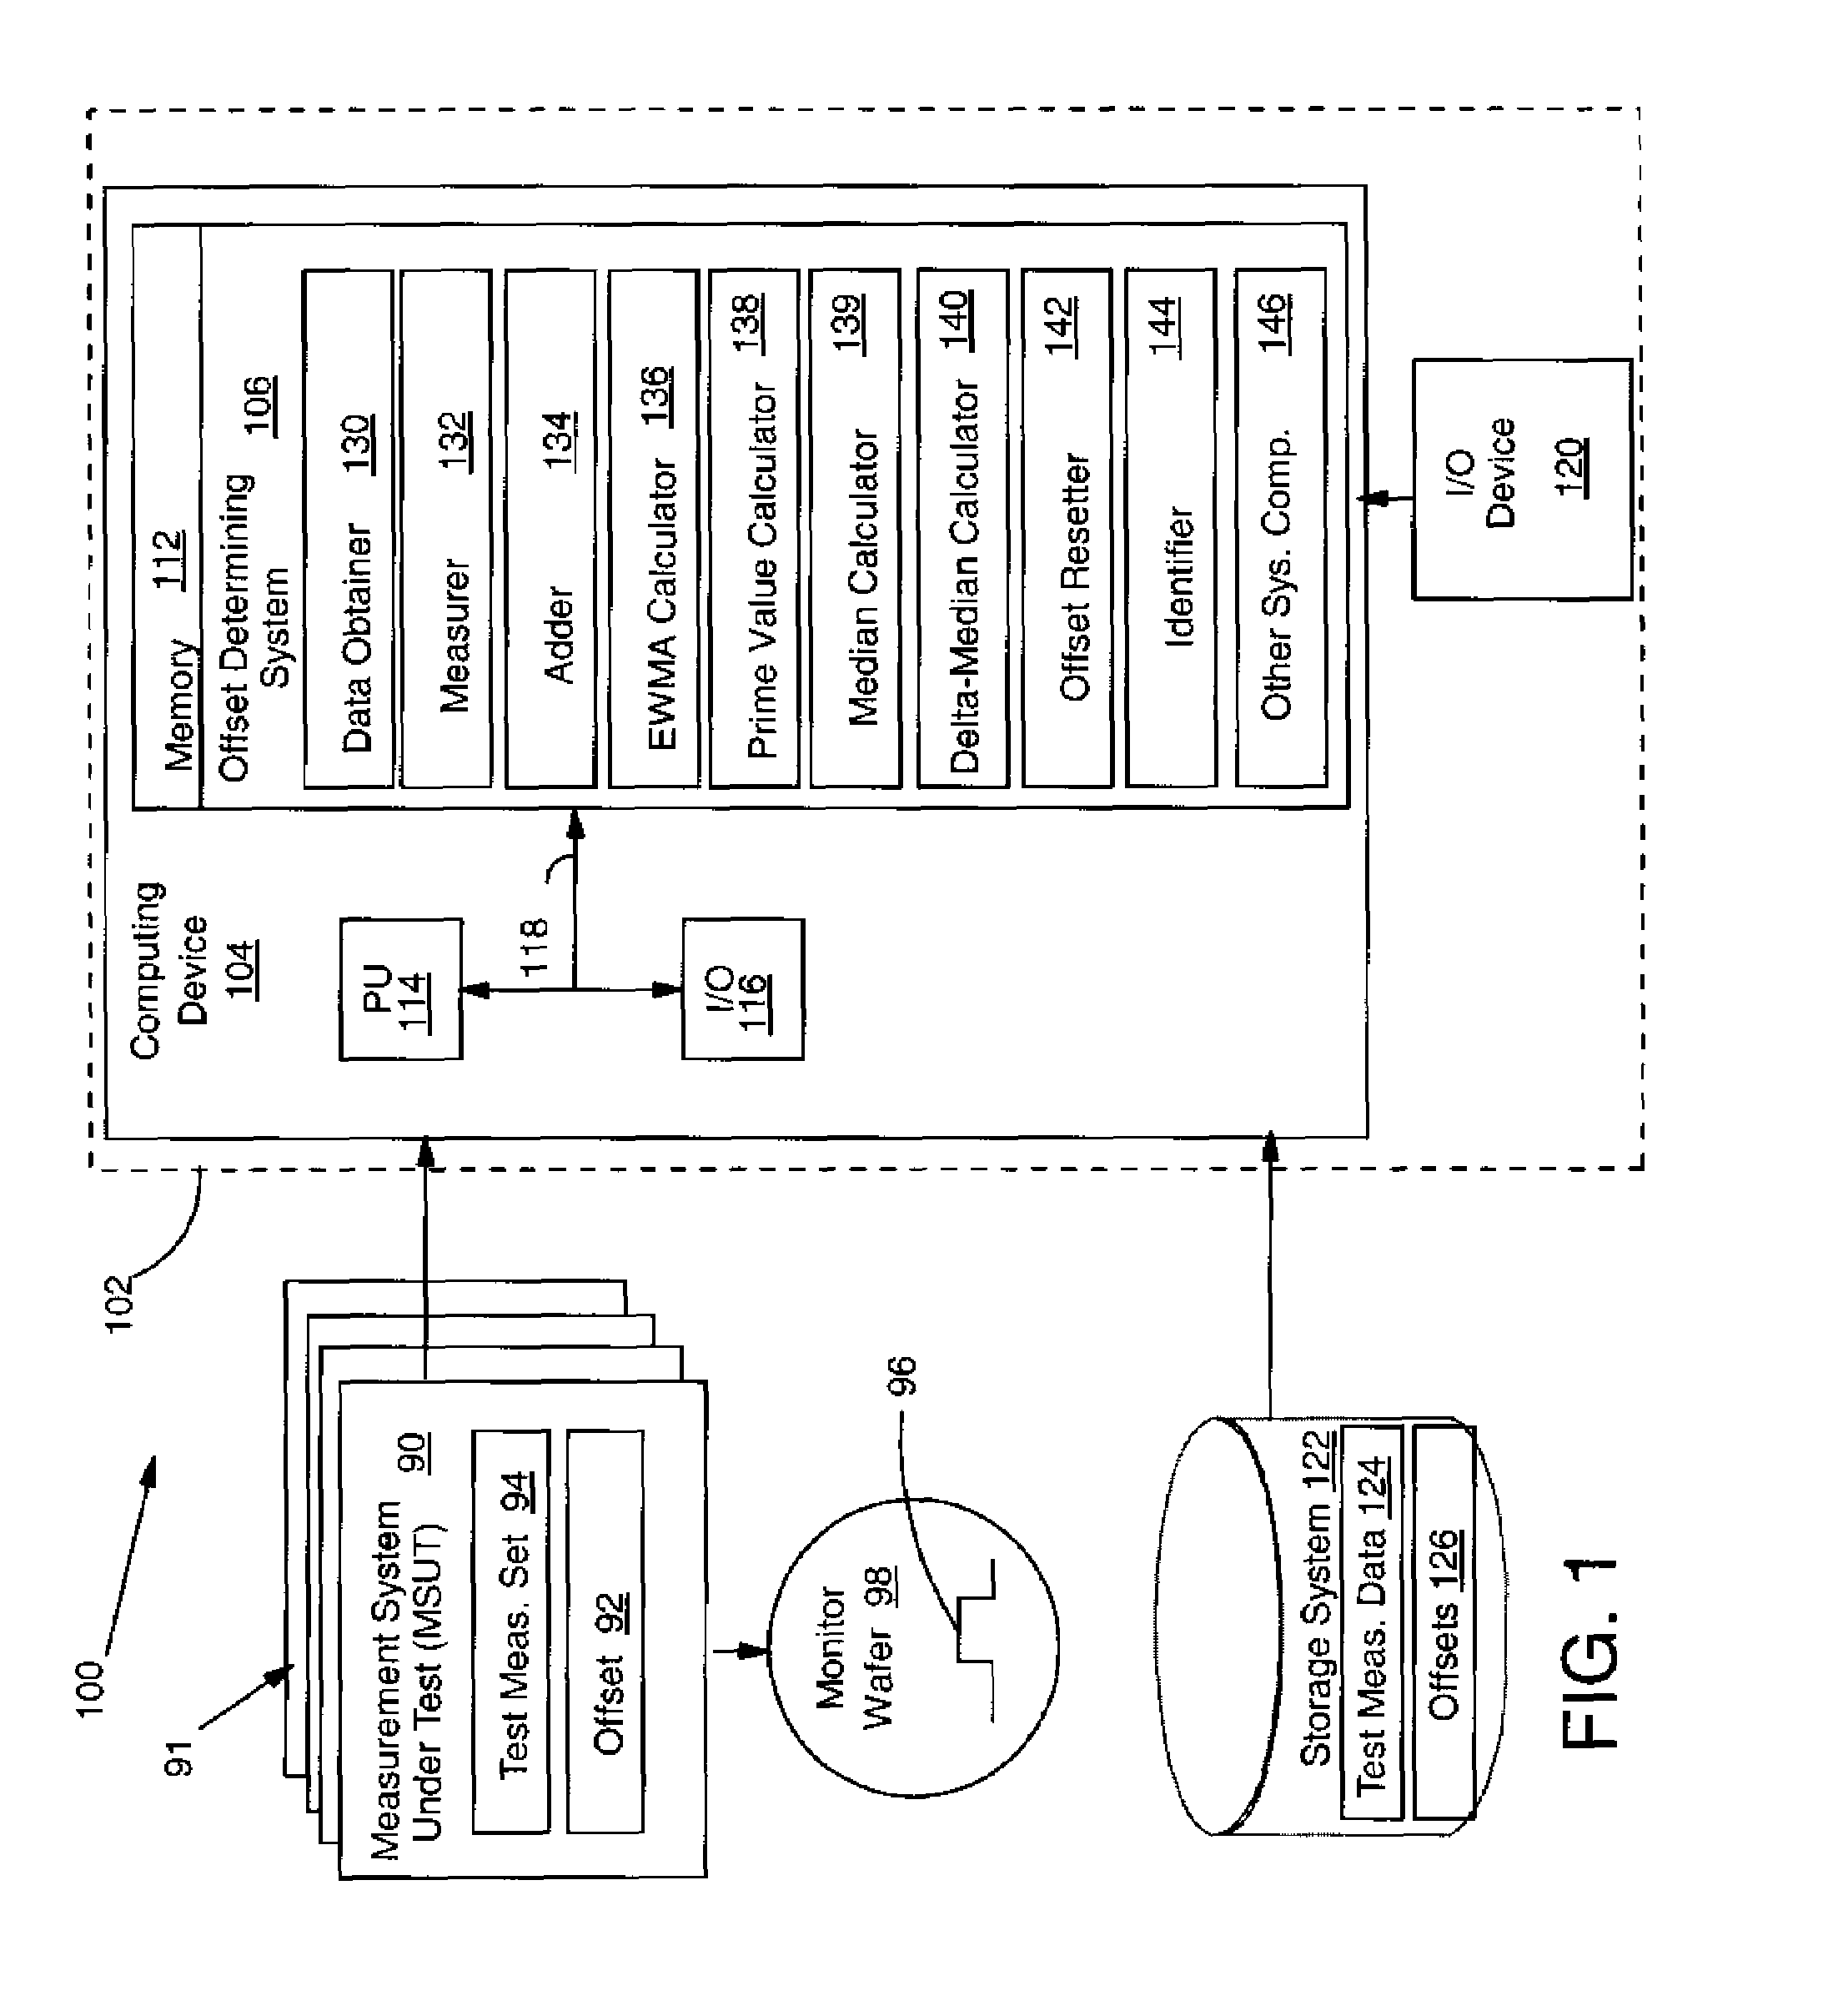 Offset determination for measurement system matching